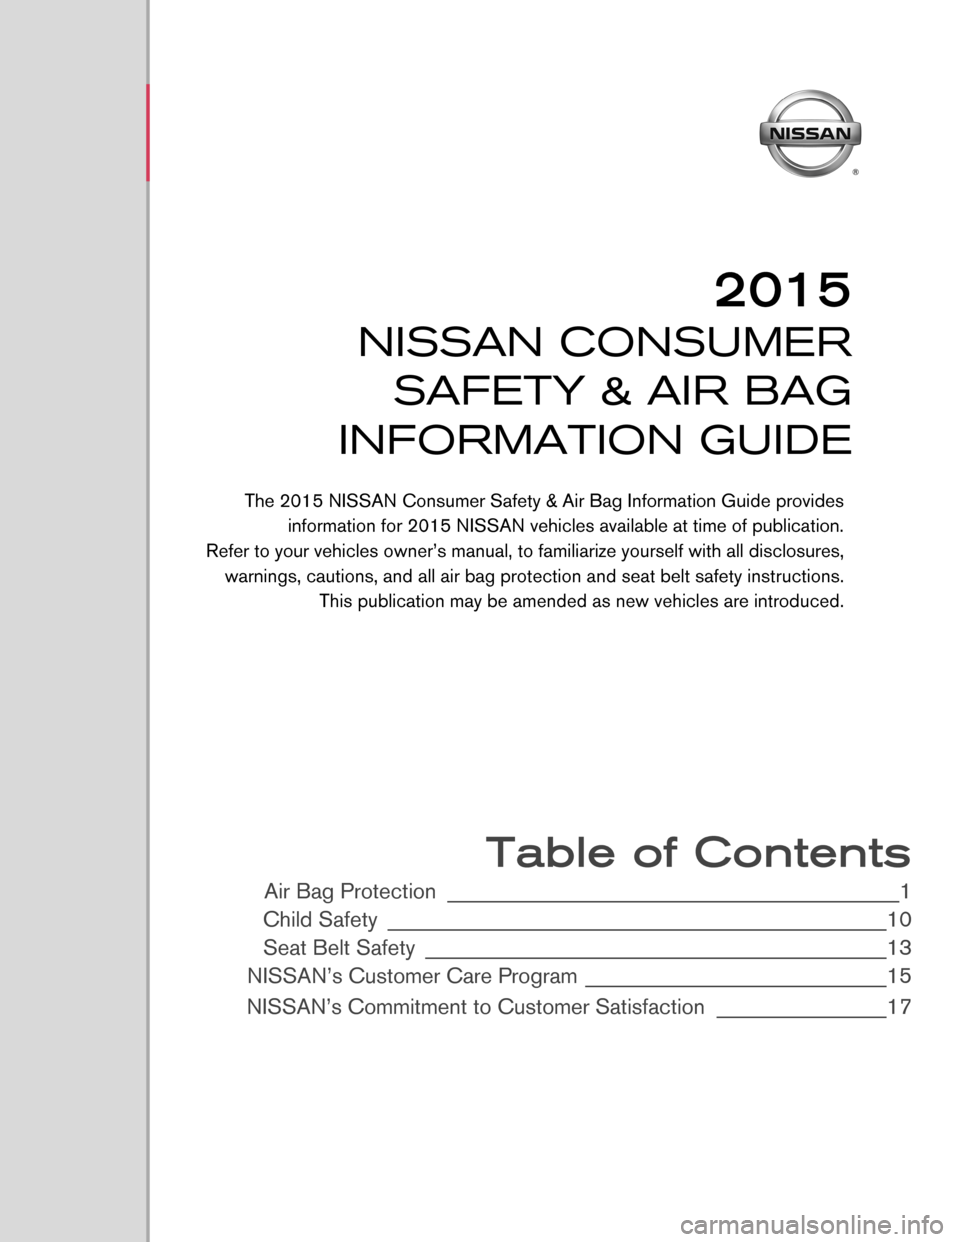 NISSAN 370Z COUPE 2015 Z34 Consumer Safety Air Bag Information Guide  
 
 
 
 
 
 
 
 
 
 
 
 
 
 
 
 
 
 
 
 
 
 
 Table of Contents 
Air Bag Protection __________________\d__________________\d____________1 
Child \fafety _________________________\d__________________\